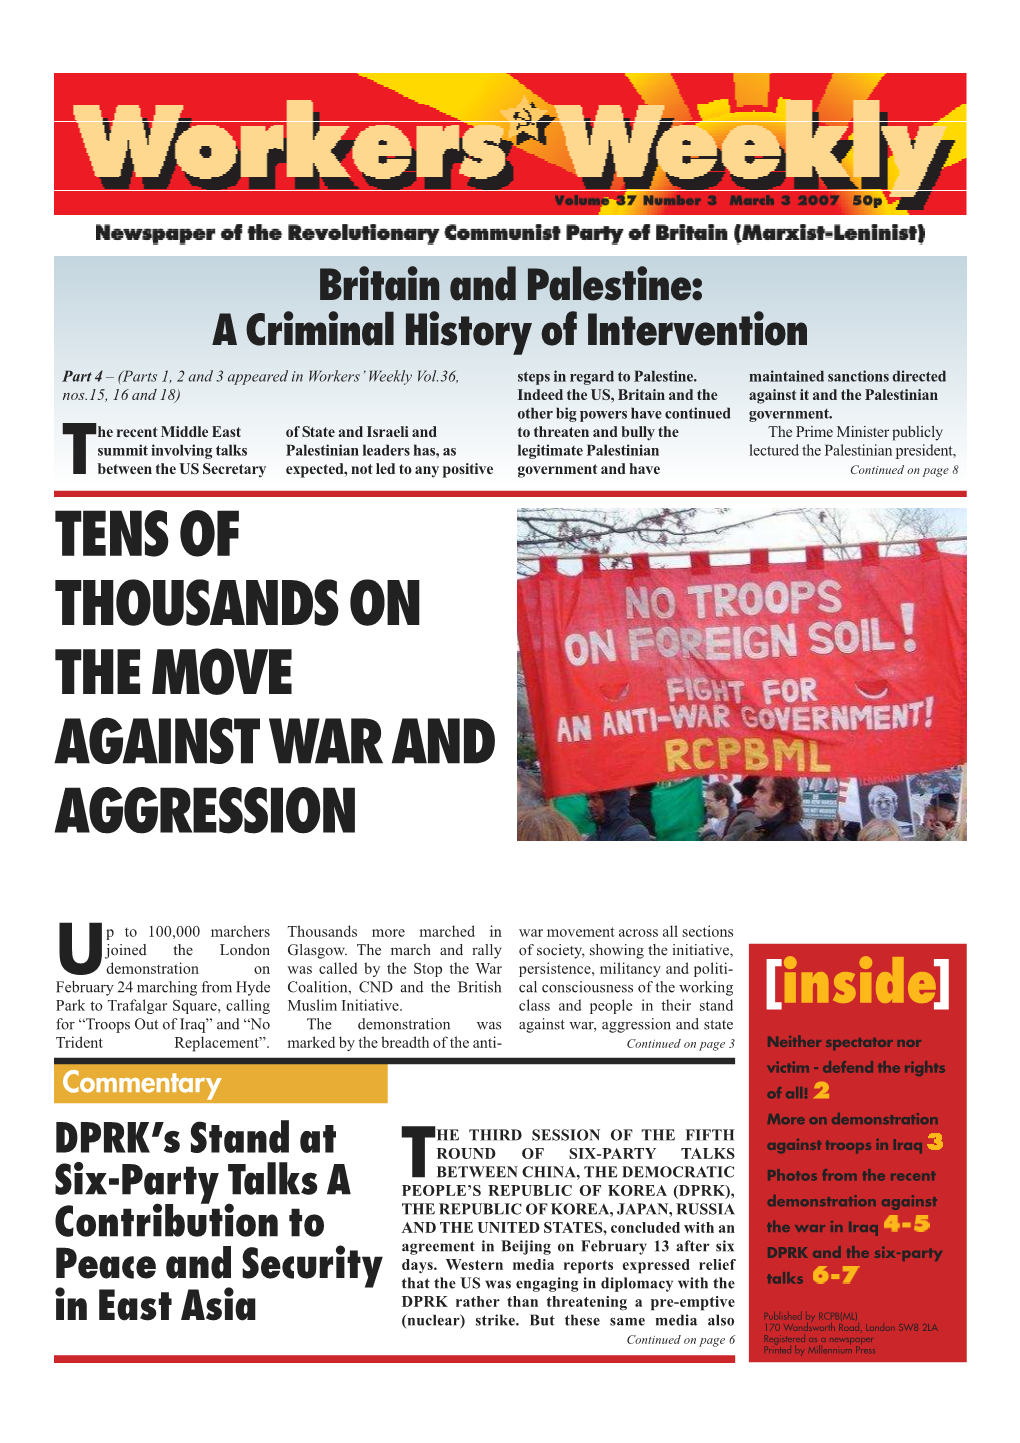 [Inside] for “Troops out of Iraq” and “No the Demonstration Was Against War, Aggression and State Trident Replacement”